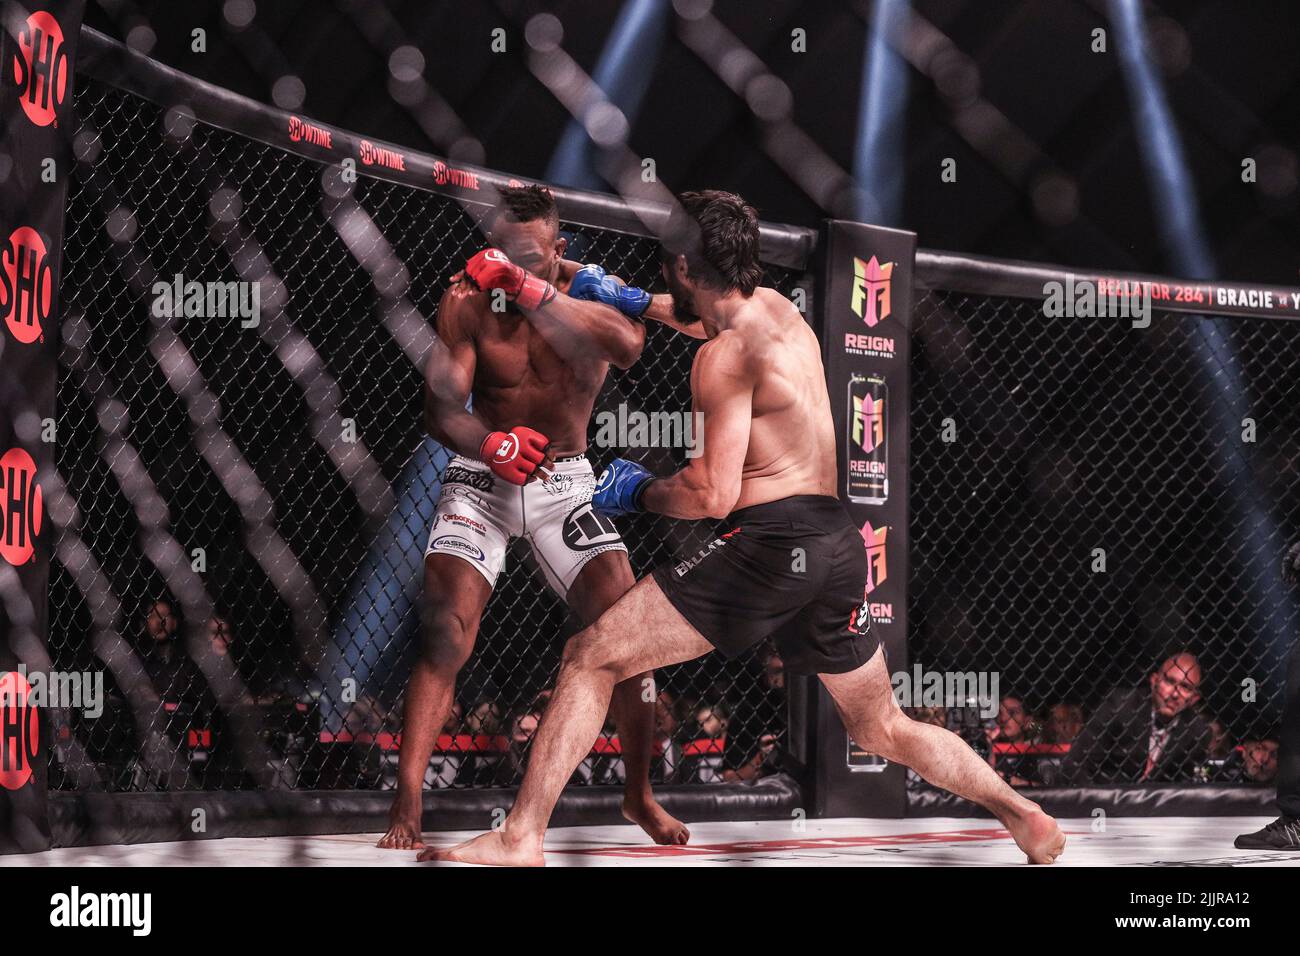 Sidney Outlaw dazed after a big overhand right from Tofiq Musayev at Bellator 283. Tofiq Musayev wins by way of Knock Out in the first round from the Stock Photo